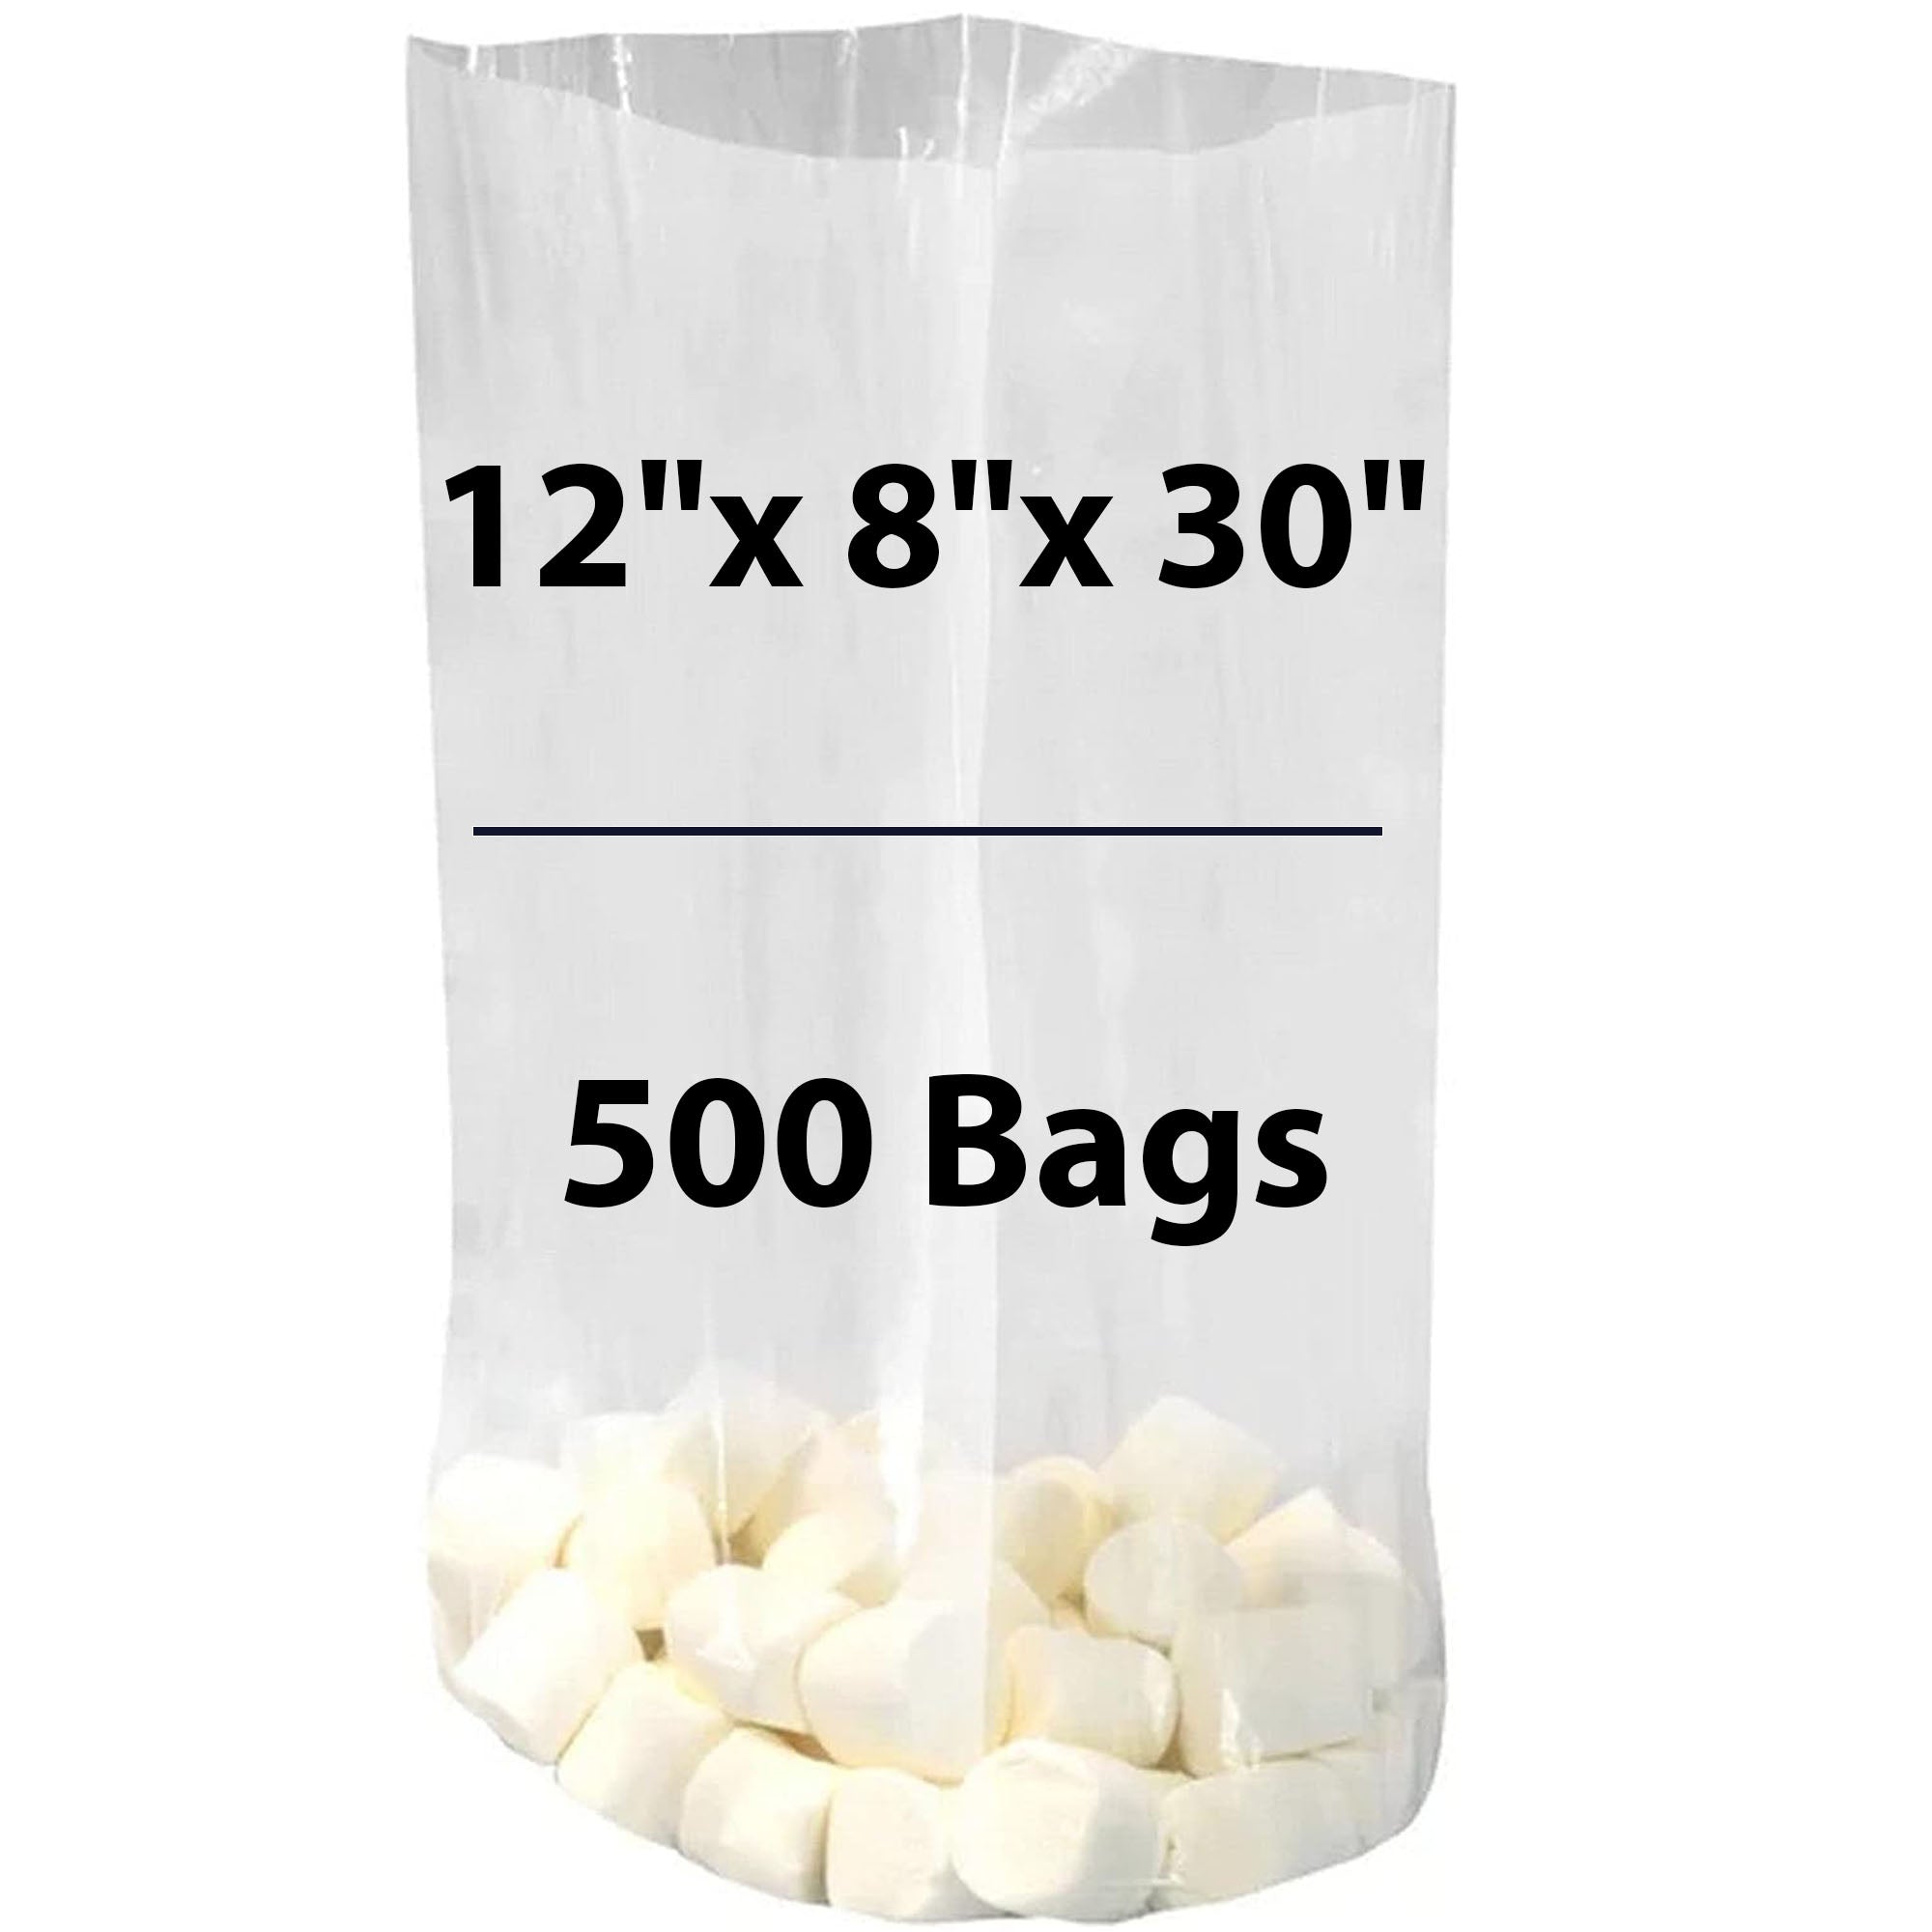 Gusseted poly Bags Sizes 12 X 8 X 30 thickness 2 Mil pack of 500 bags